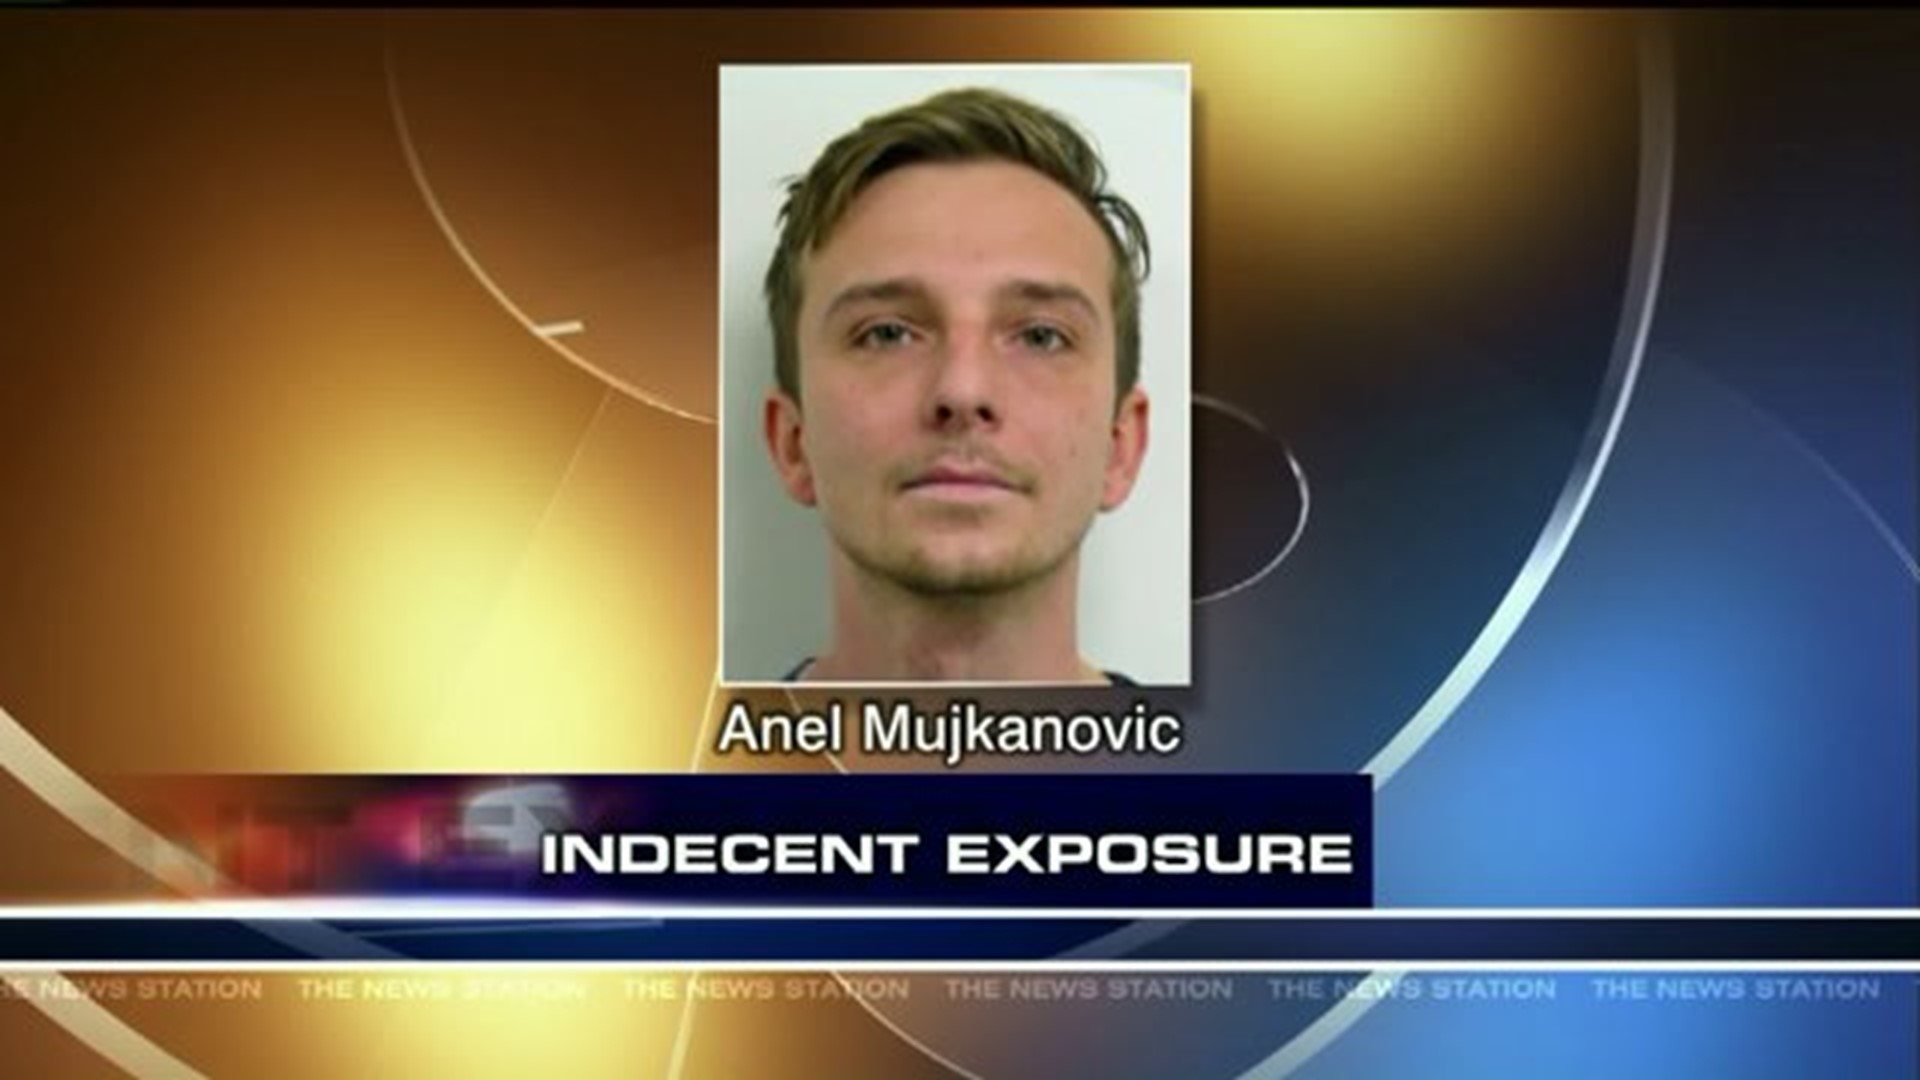 Man Accused of Urinating on Merchandise Identified